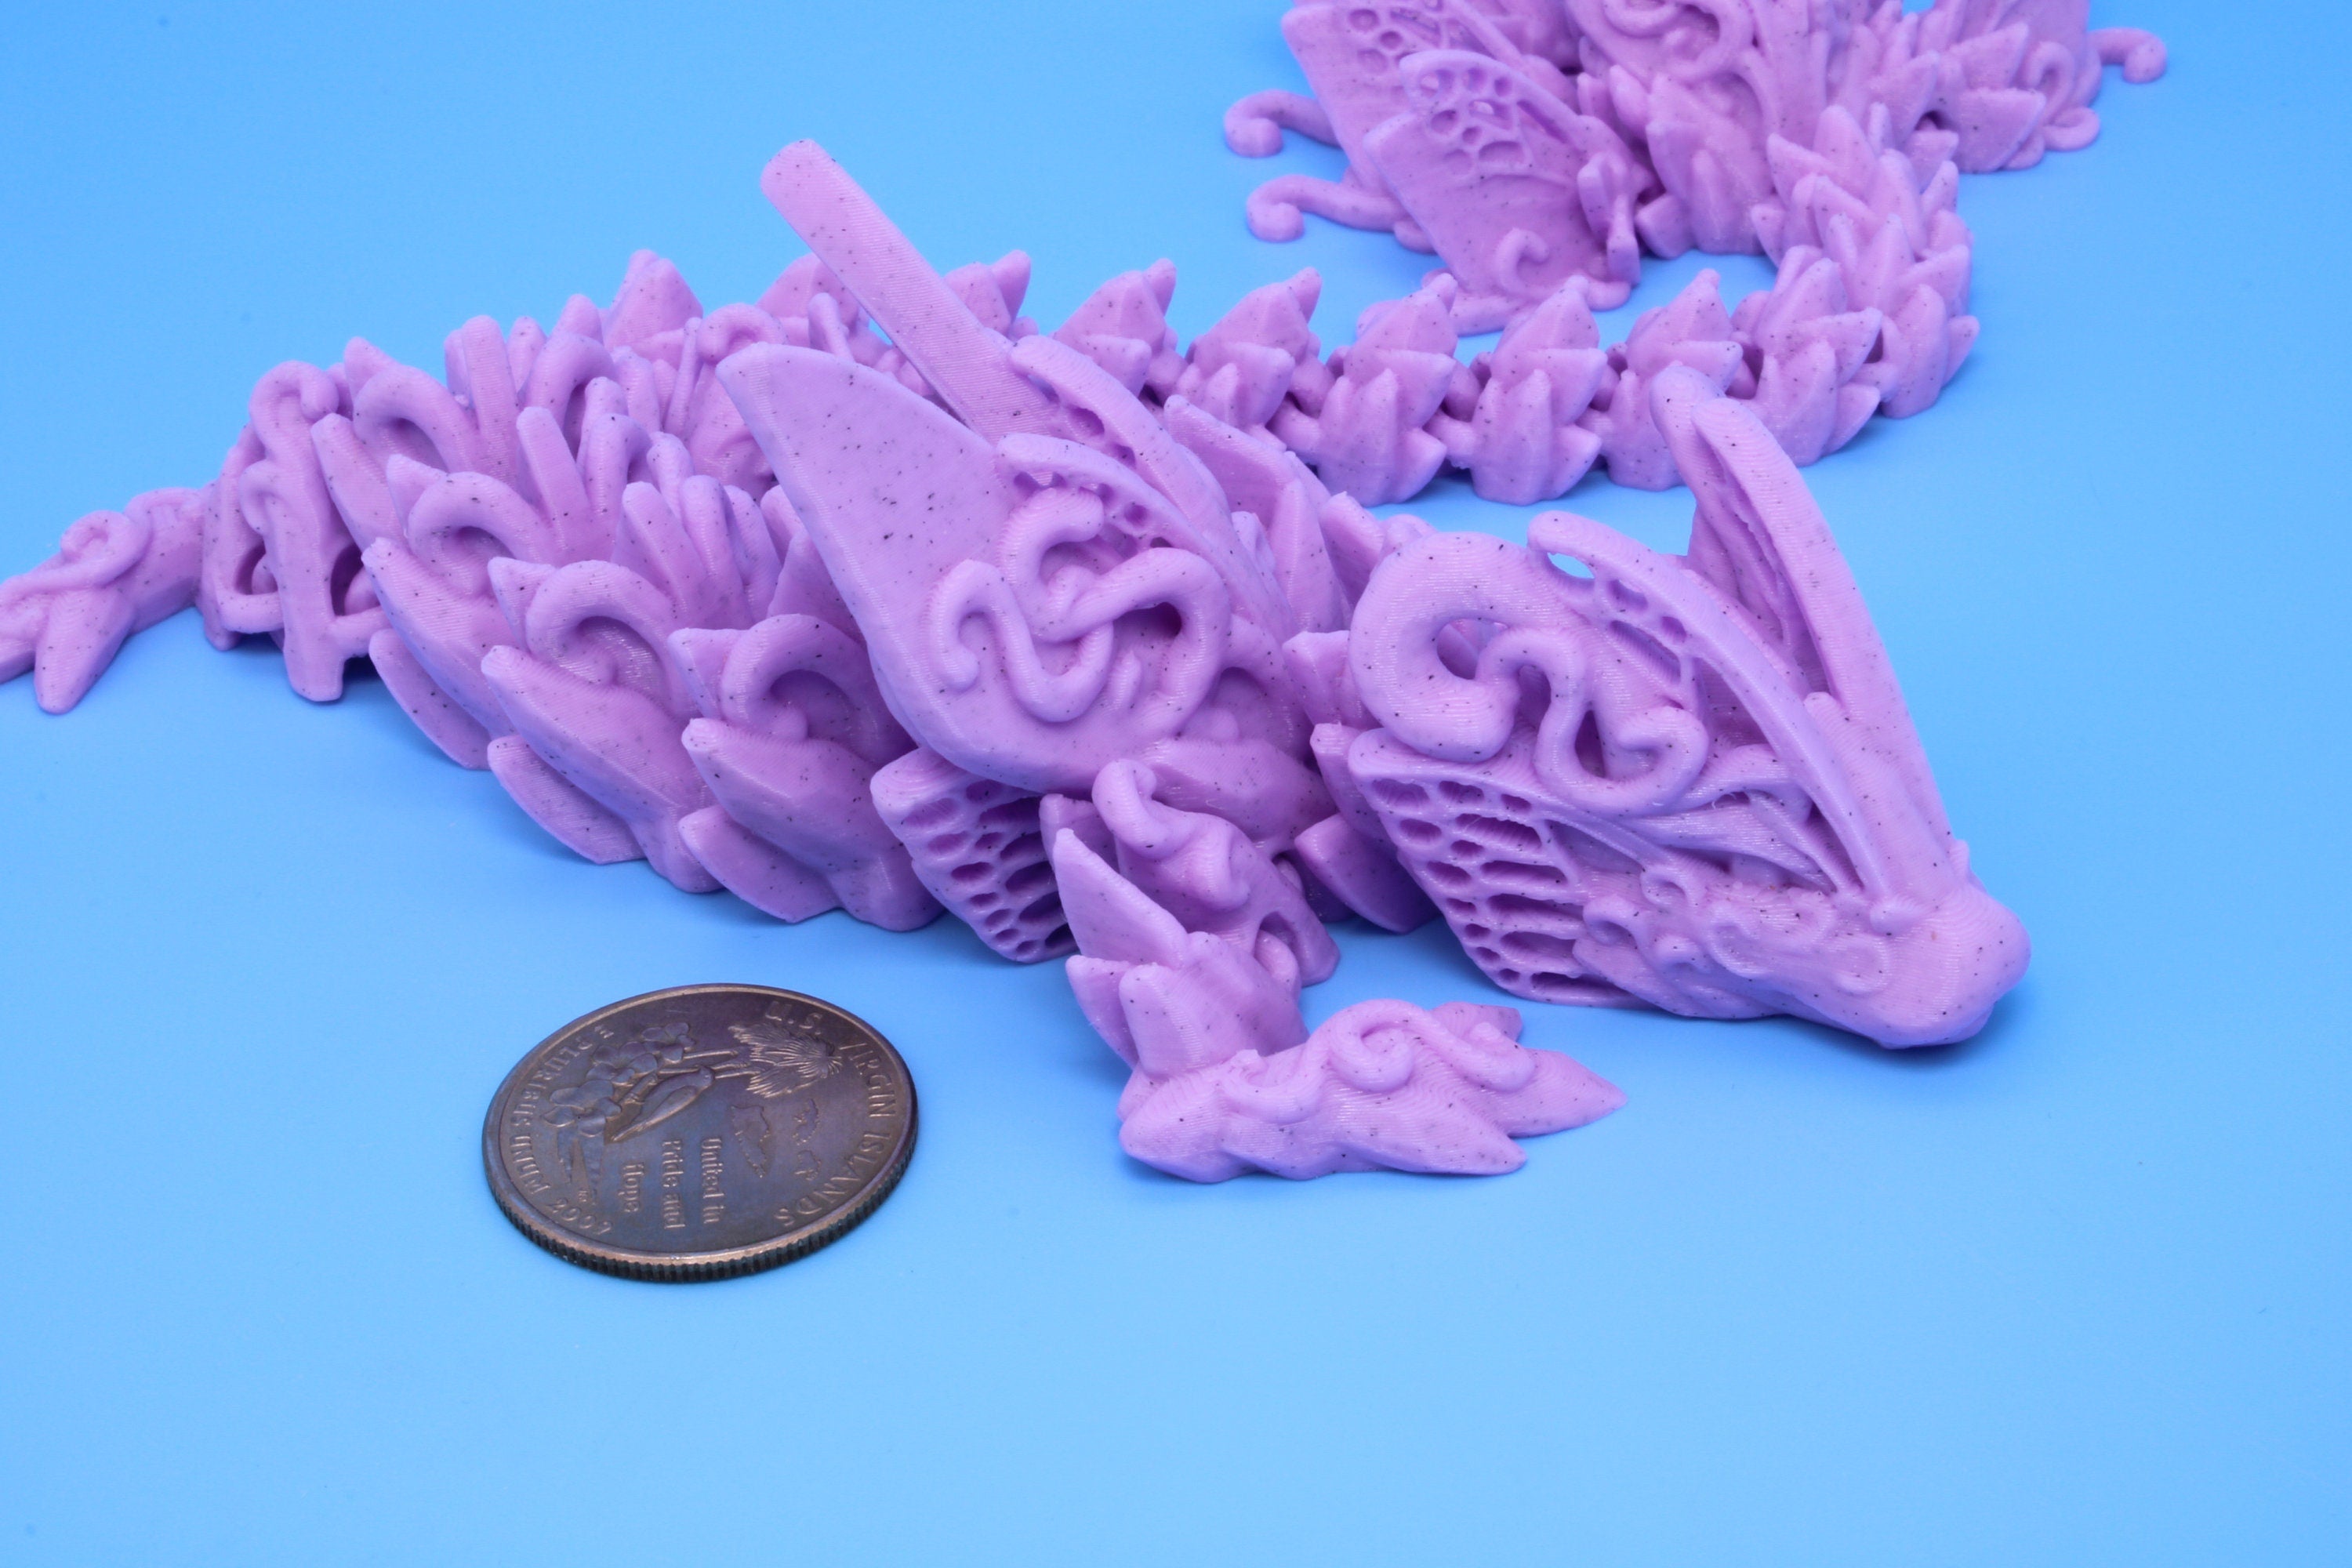 Butterfly Dragon - Pink chip | 3D printed | Articulating Dragon 11.5 in